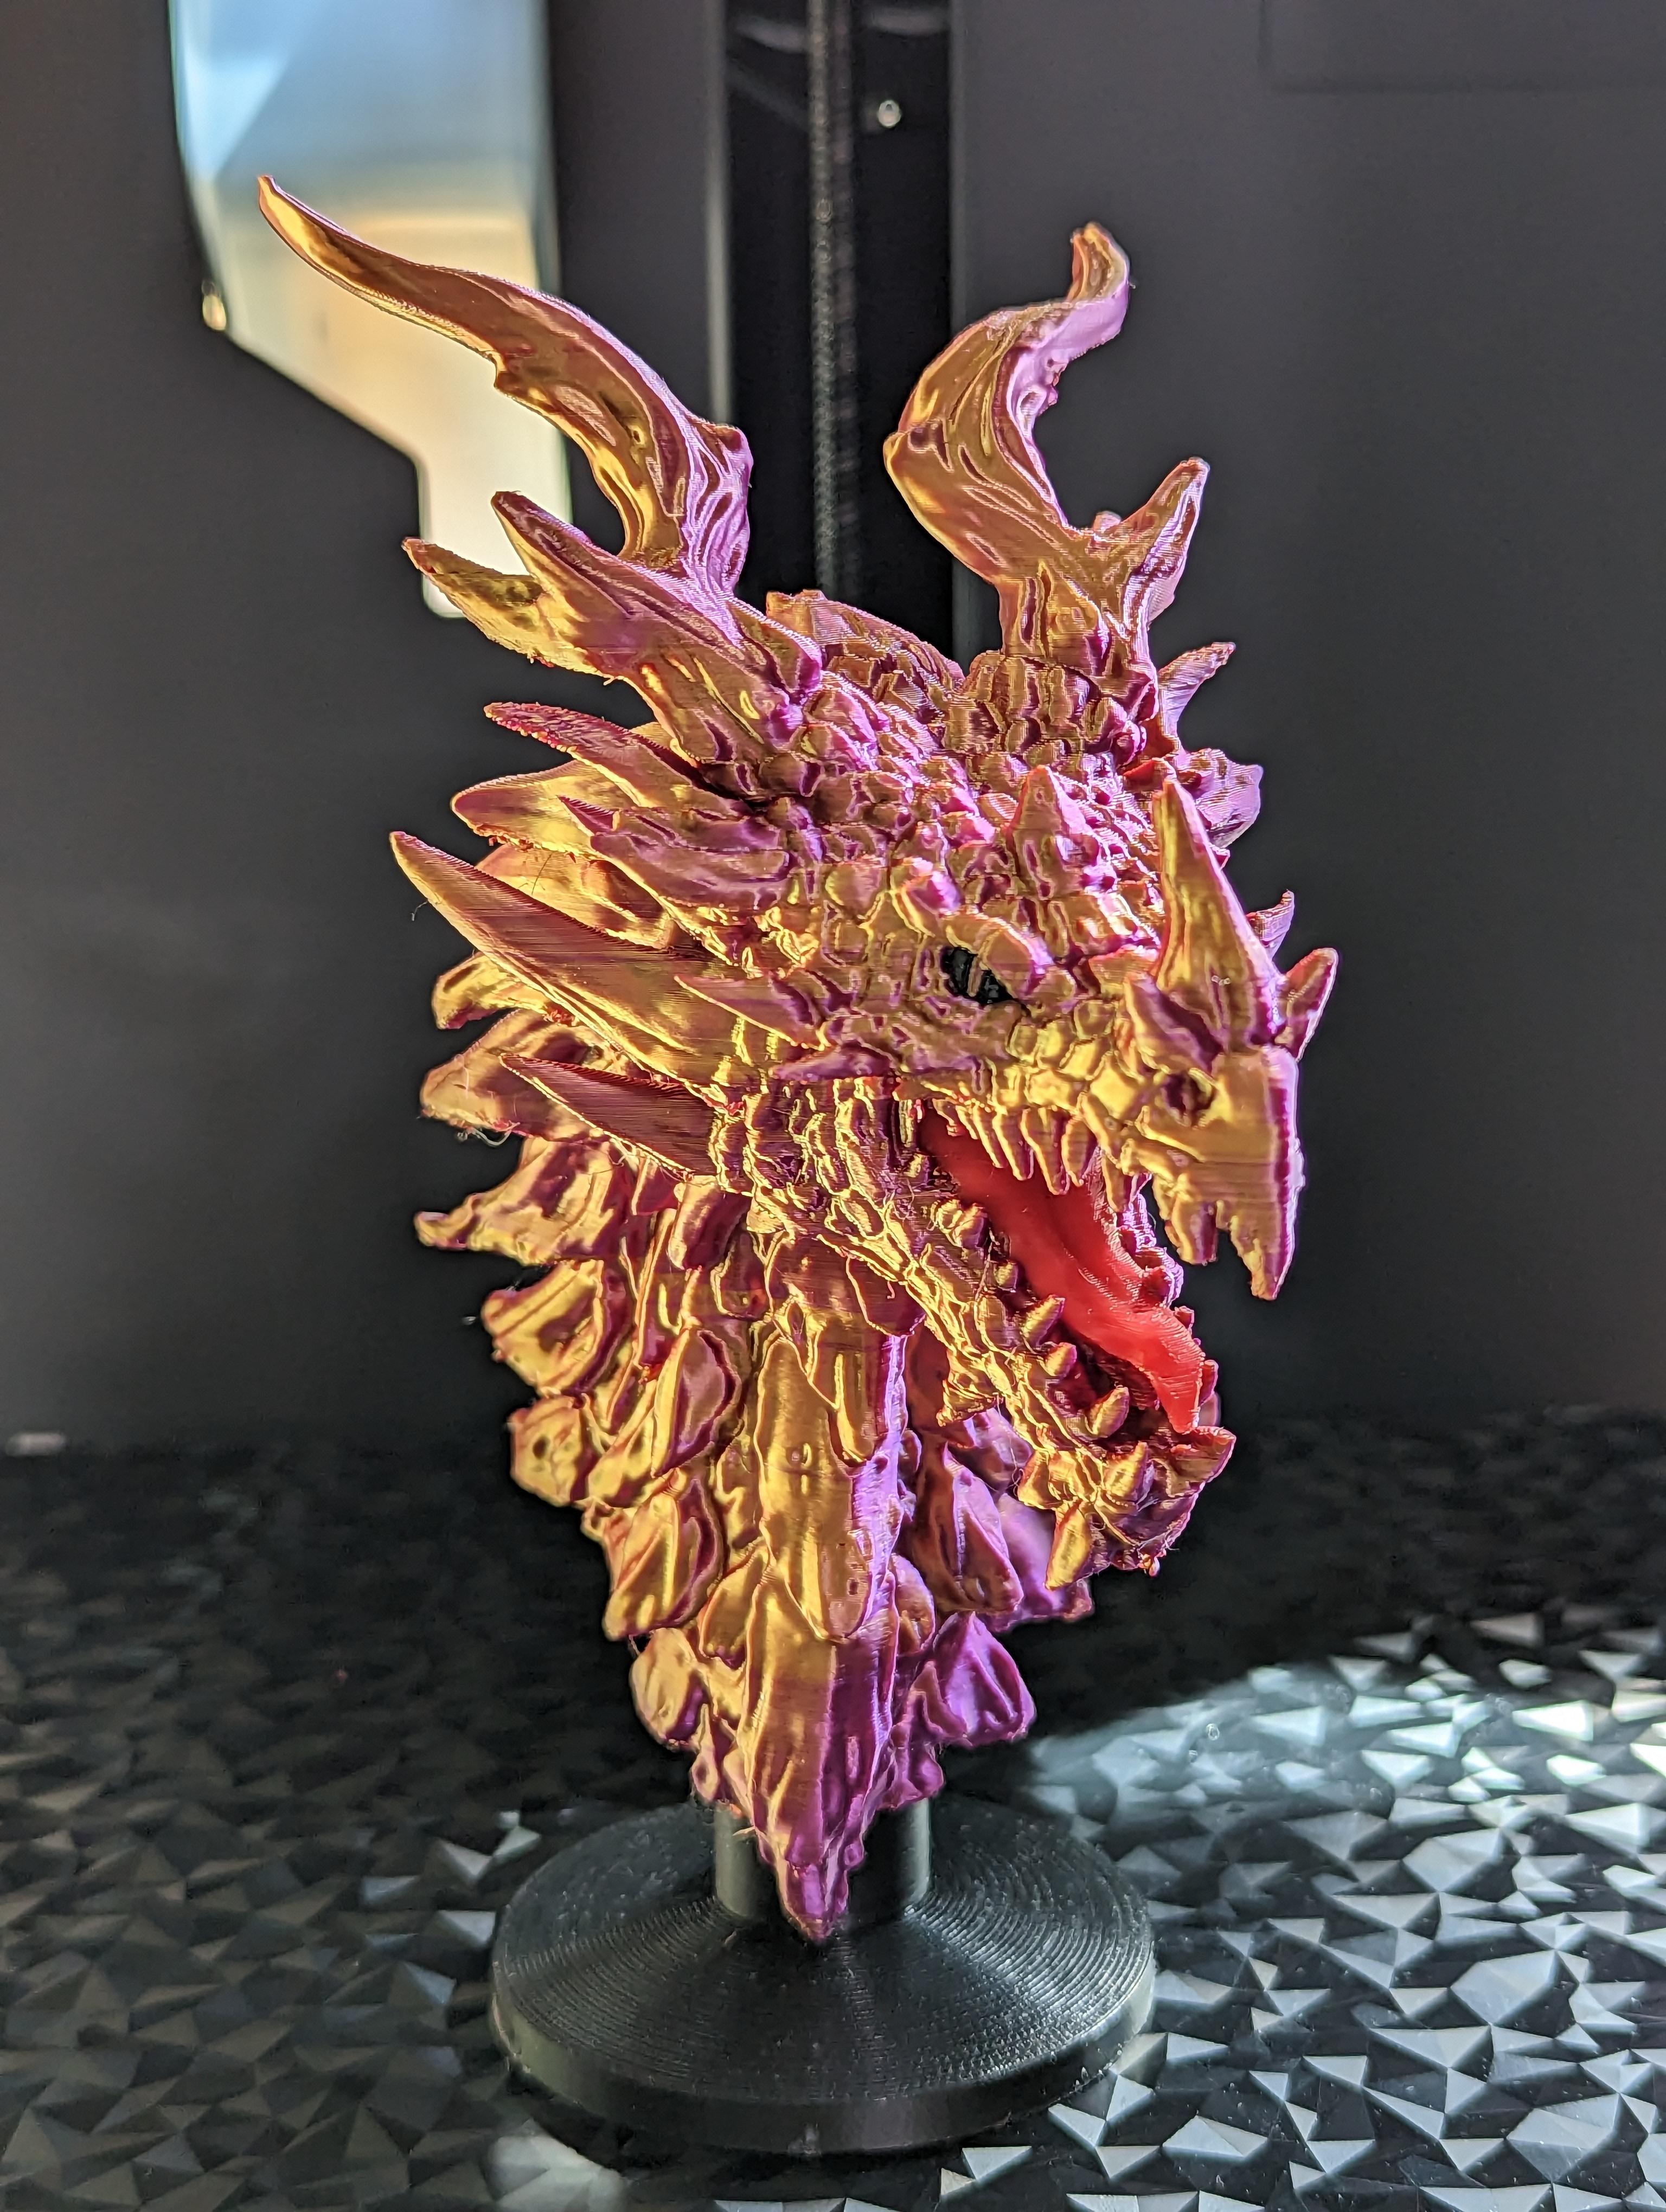 Dragon Head 1 - Fan Art - Decoration - Printed on Bambu Lab P1P w/AMS with tri-color Filament.    Painted in Bambu Studio.   Tree Supports with Petg interface - 3d model